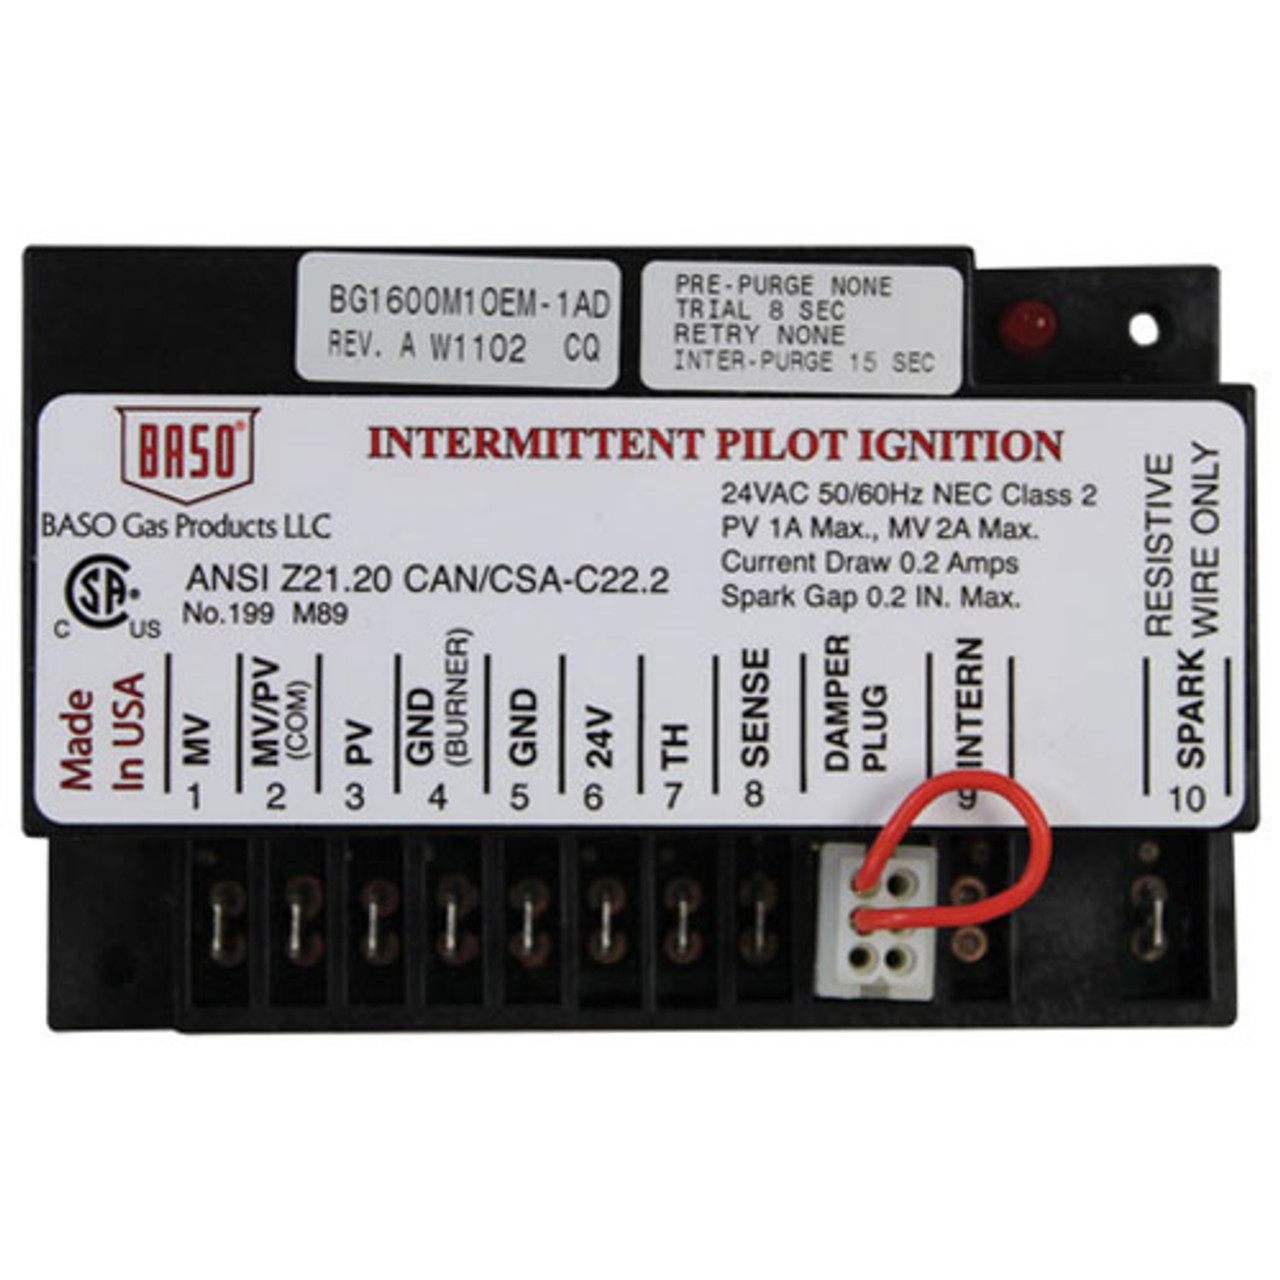 Ignition Control - Replacement Part For Johnson Controls G770KHA2